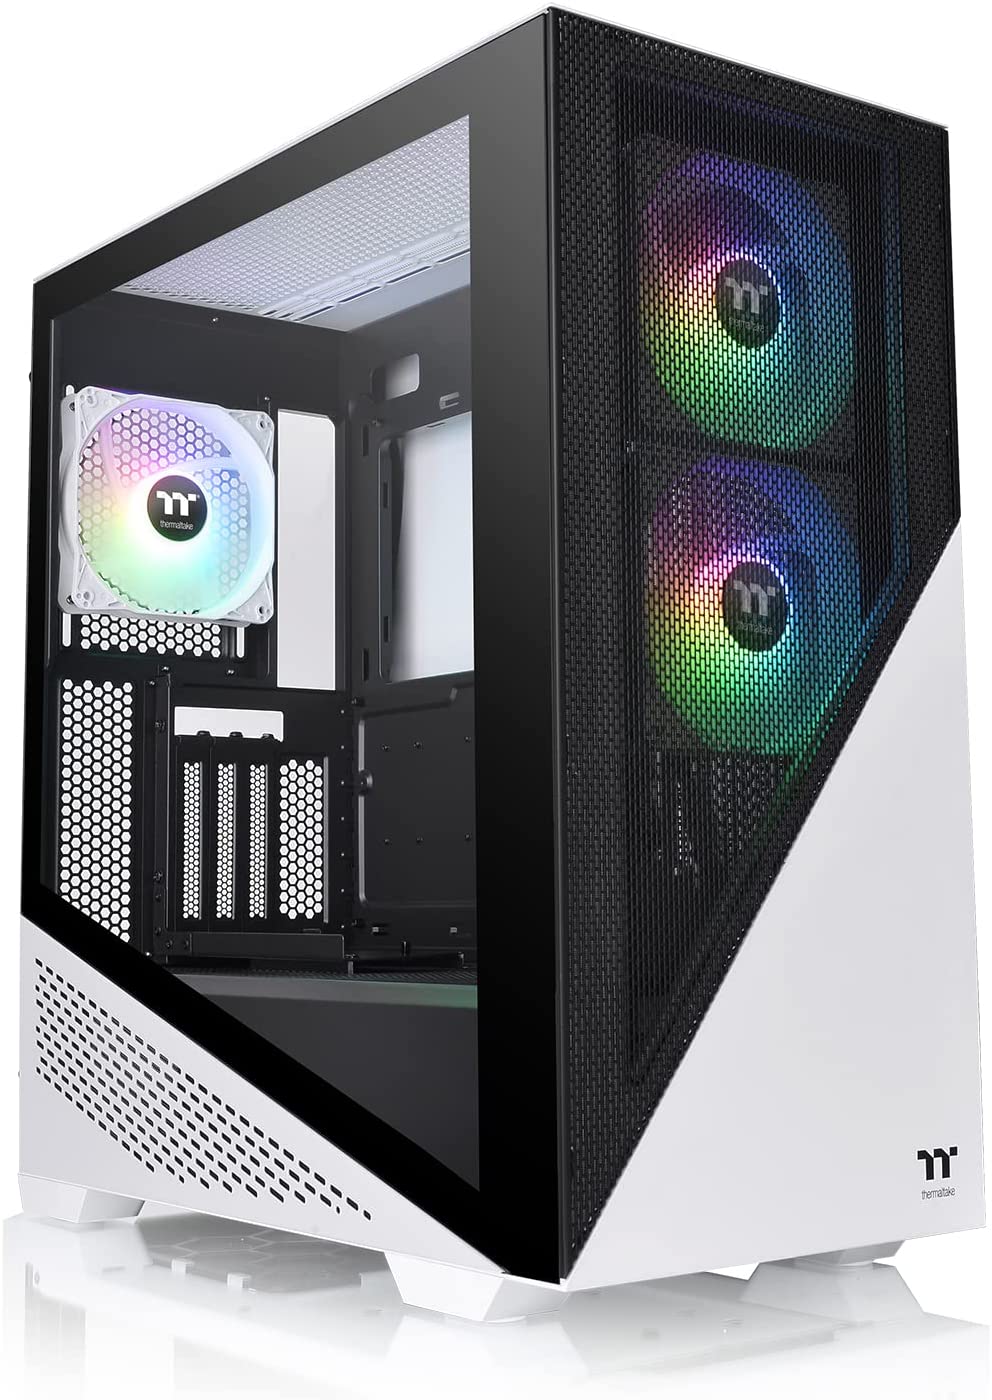 Thermaltake Divider 370 TG ARGB Motherboard Sync E-ATX Mid Tower Computer Case with 3x120mm ARGB Fan Pre-Installed, Tempered Glass Side Panel, Ventilated Front Mesh Panel, CA-1S4-00M6WN-00, White Divider 370 White